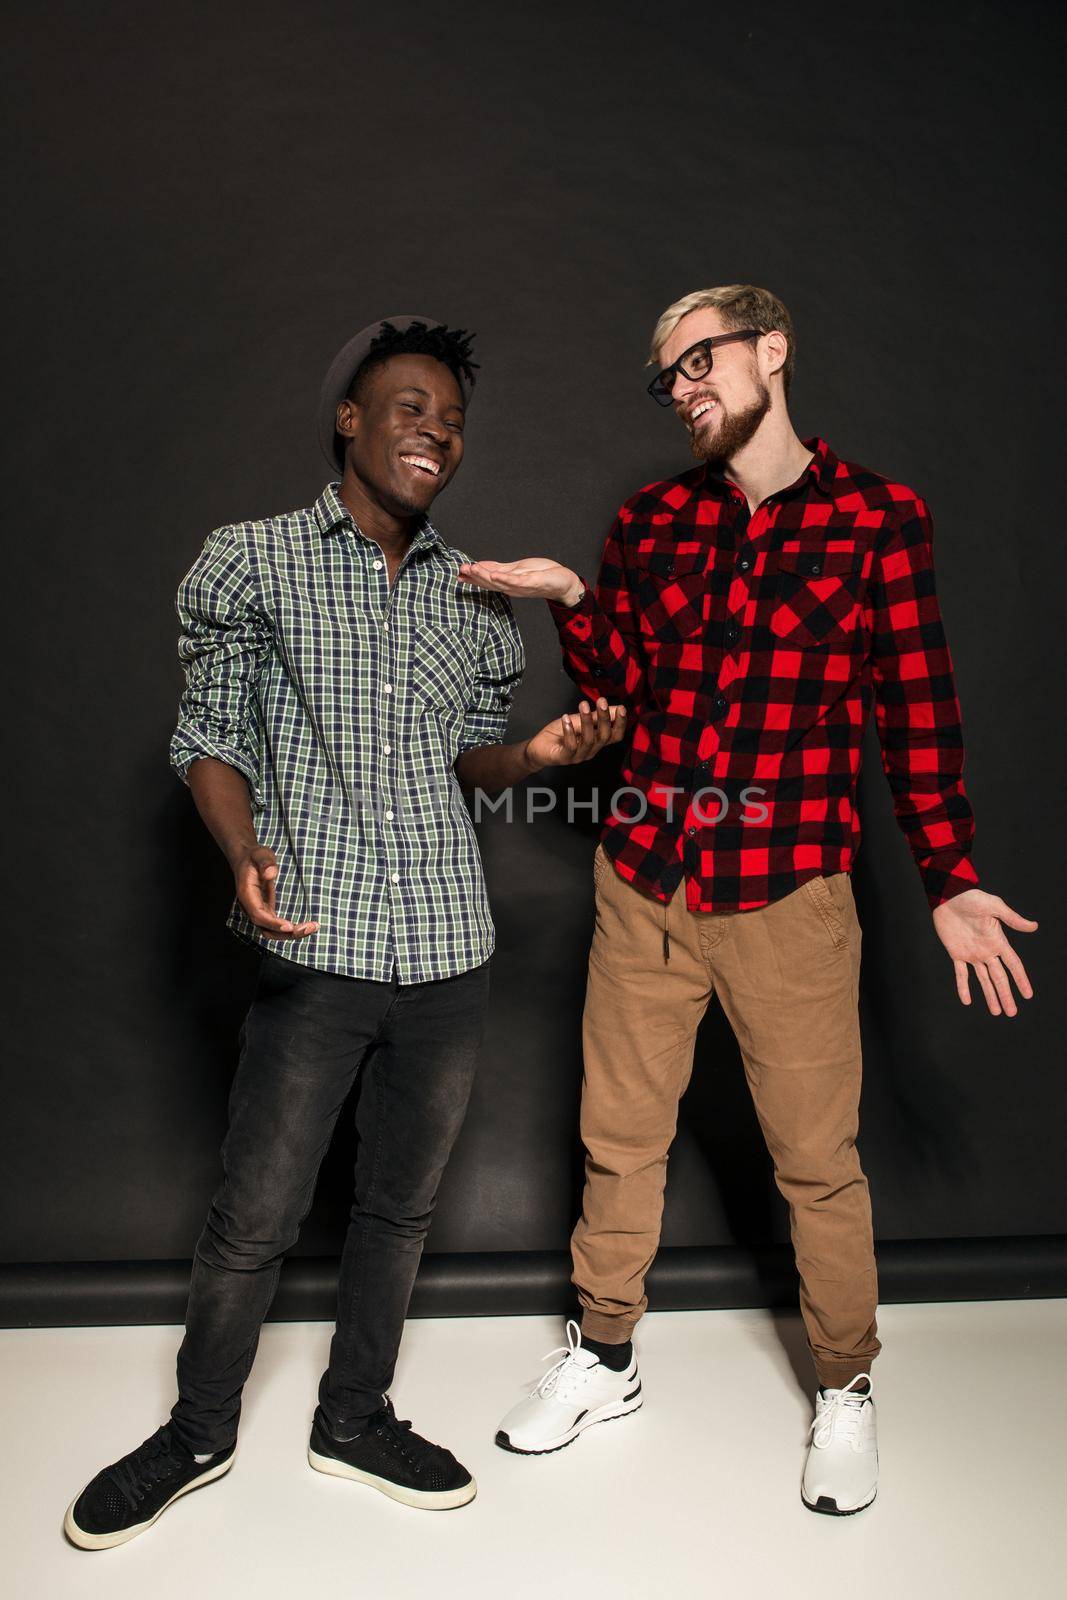 Studio lifestyle portrait of two best friends hipster boys going crazy and having great time together. On black background. by nazarovsergey